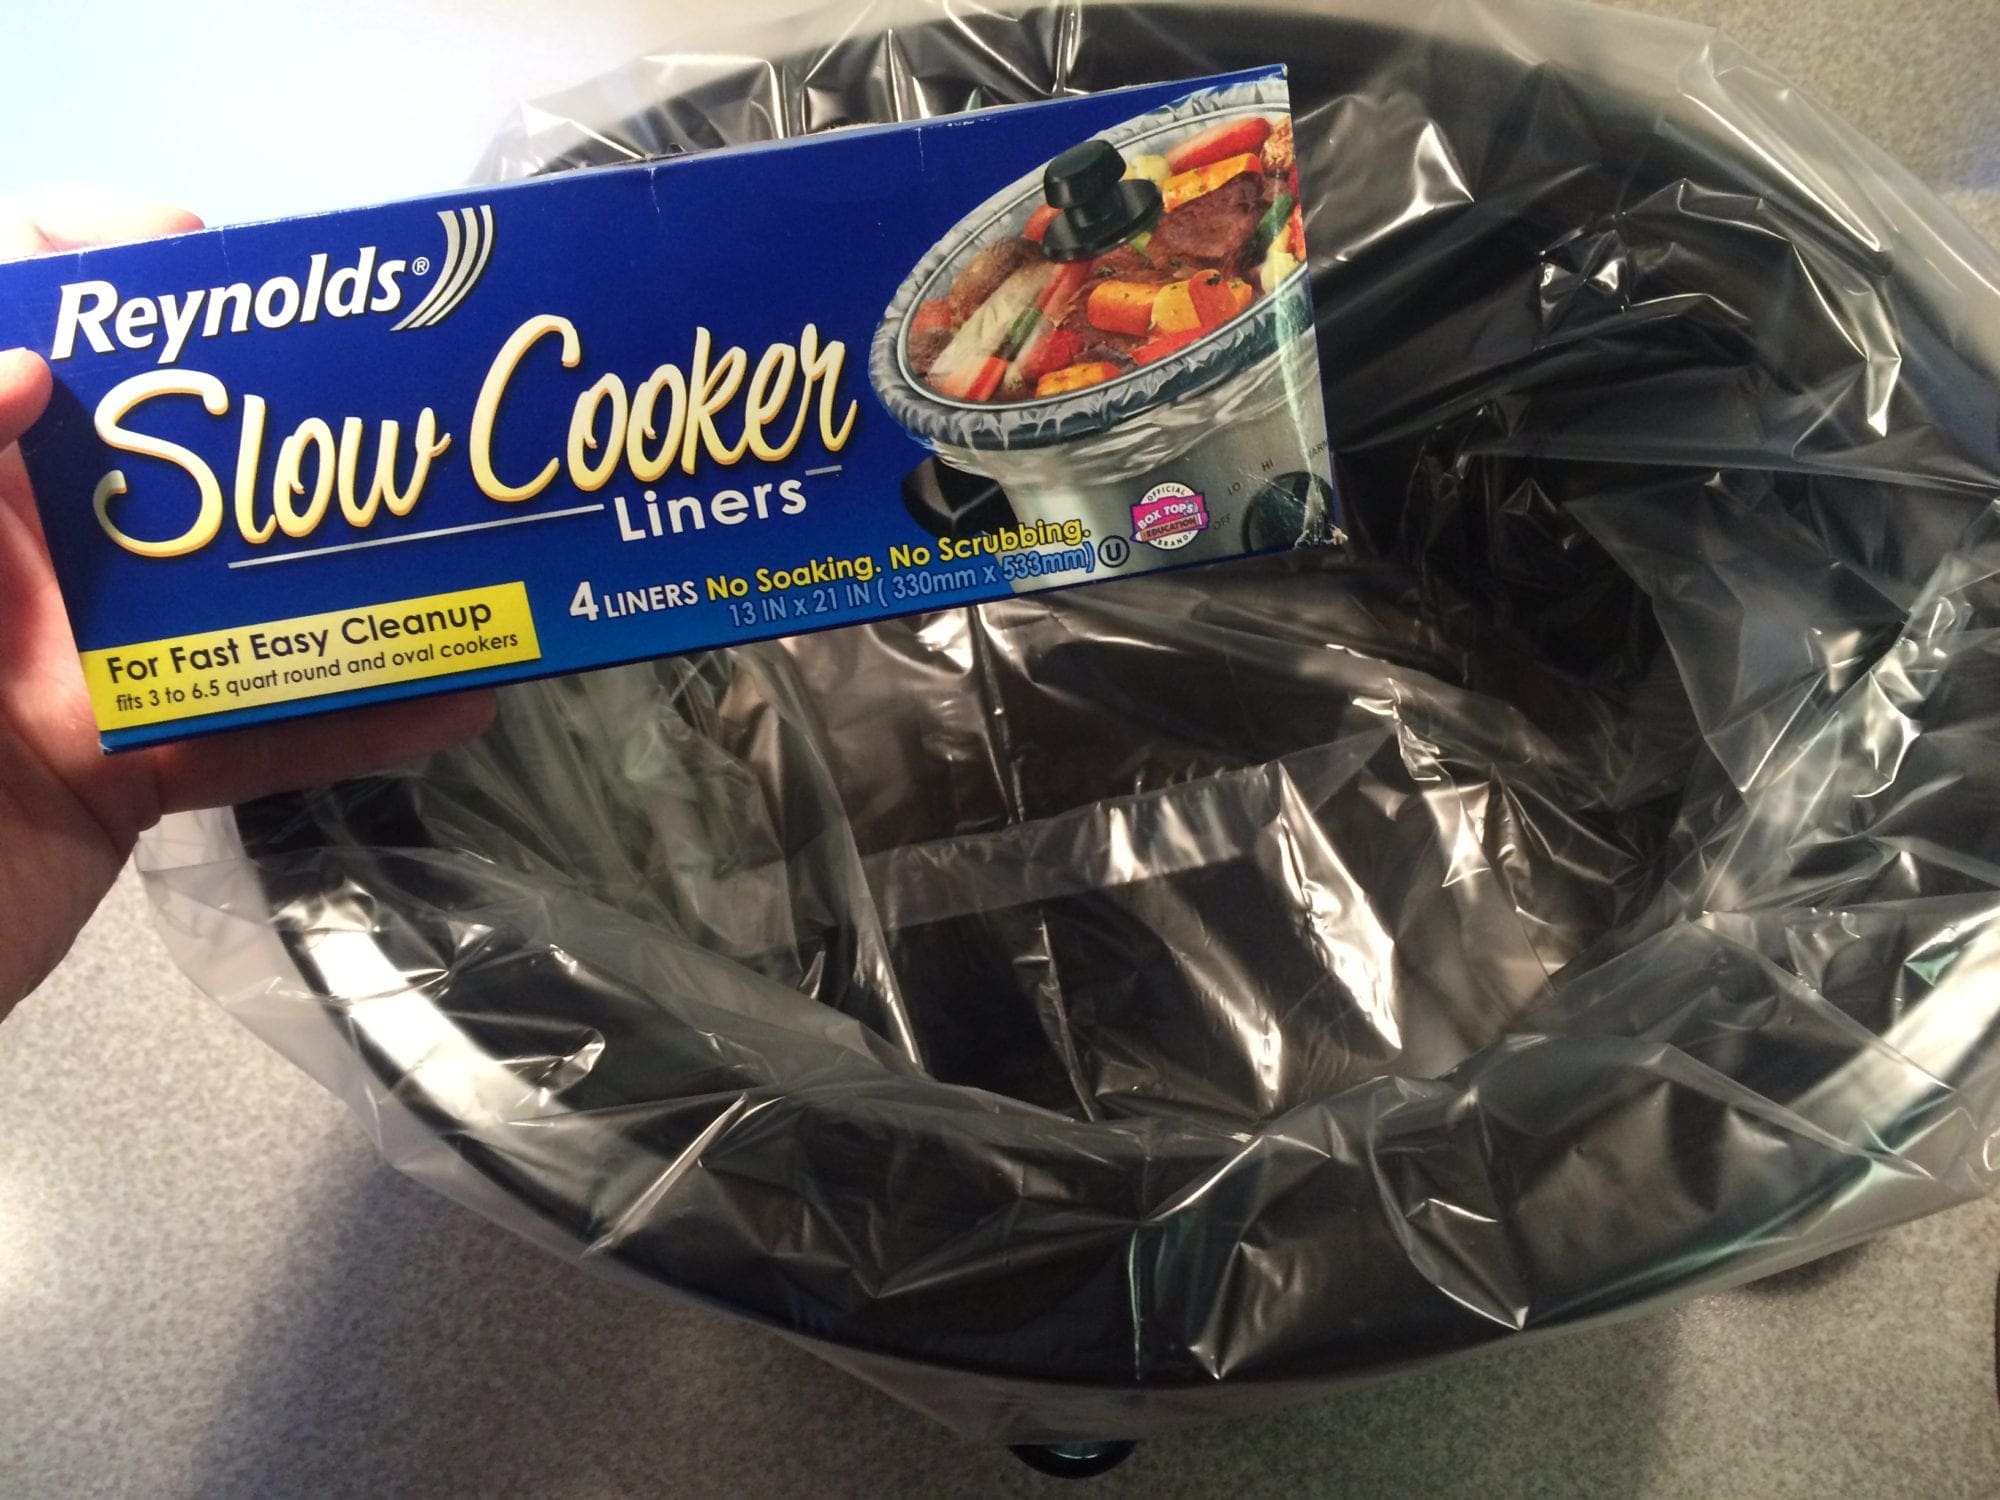 Reynolds Slow Cooker Liners 4-pack Fits 3 to 8 Quart Round & Oval Cookers